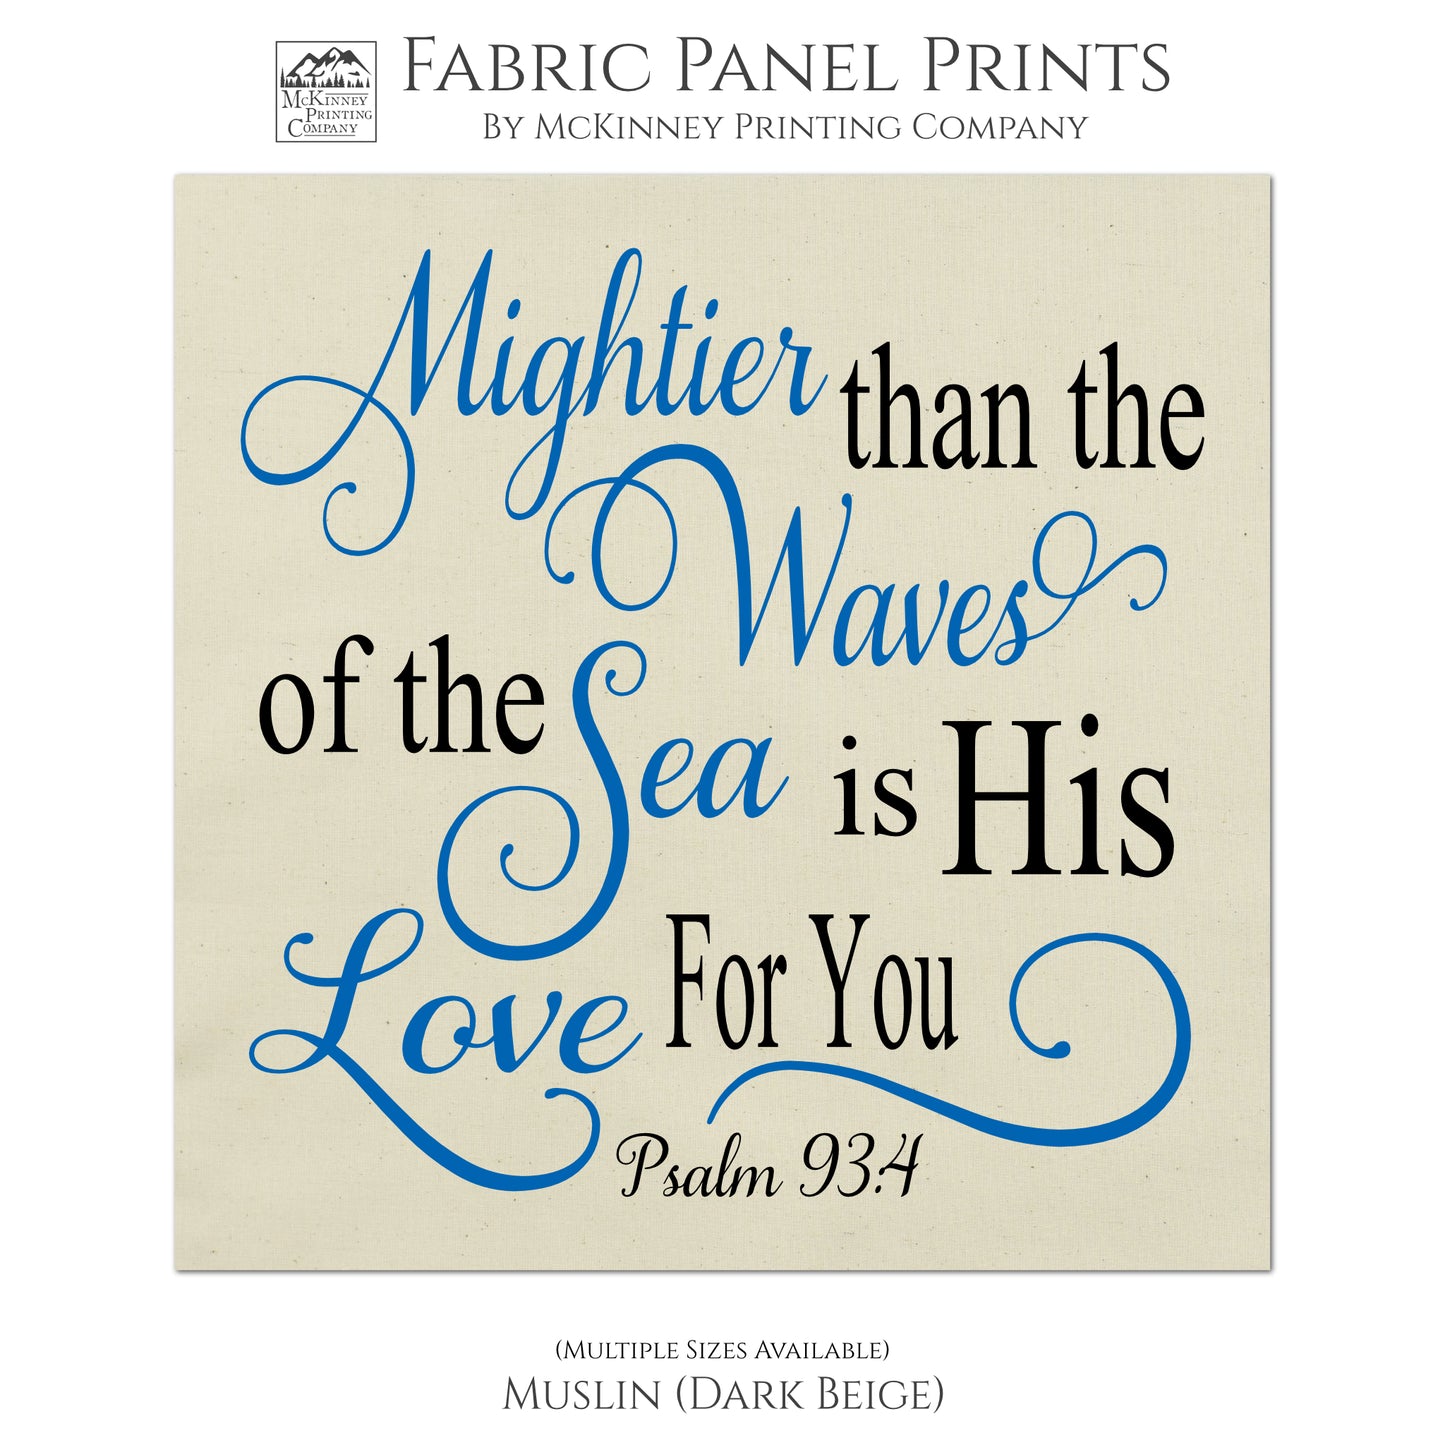 Mightier than the waves of the sea is His love for you - Psalm 93:4 - Fabric Panel Print, Quilting Fabric - Muslin